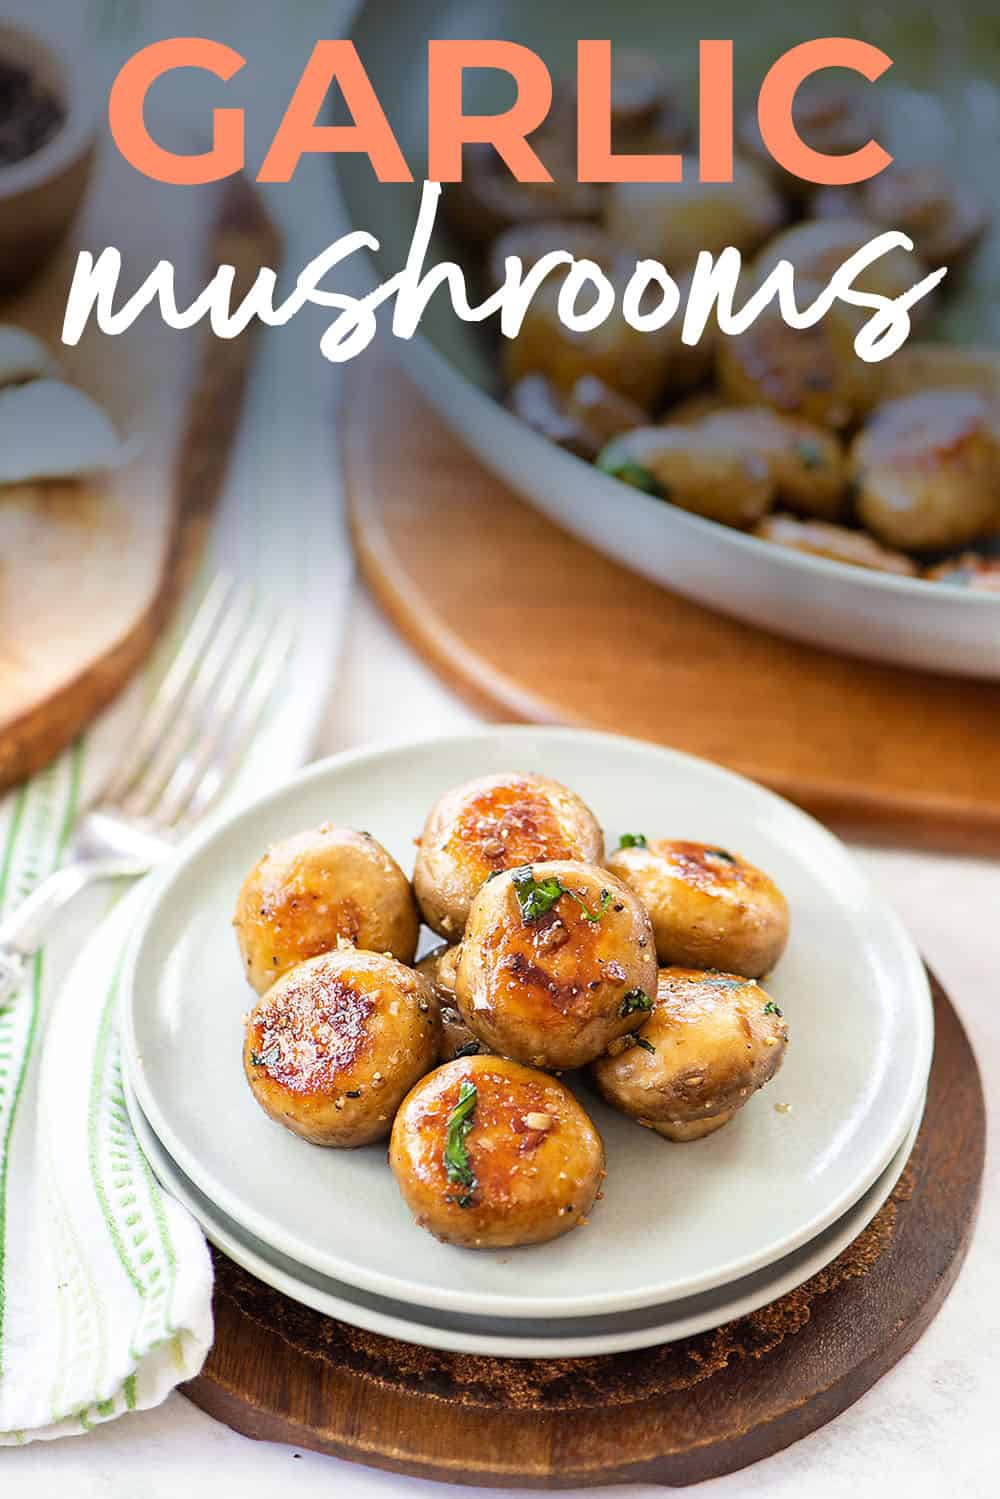 garlic mushrooms on plate with text for Pinterest.